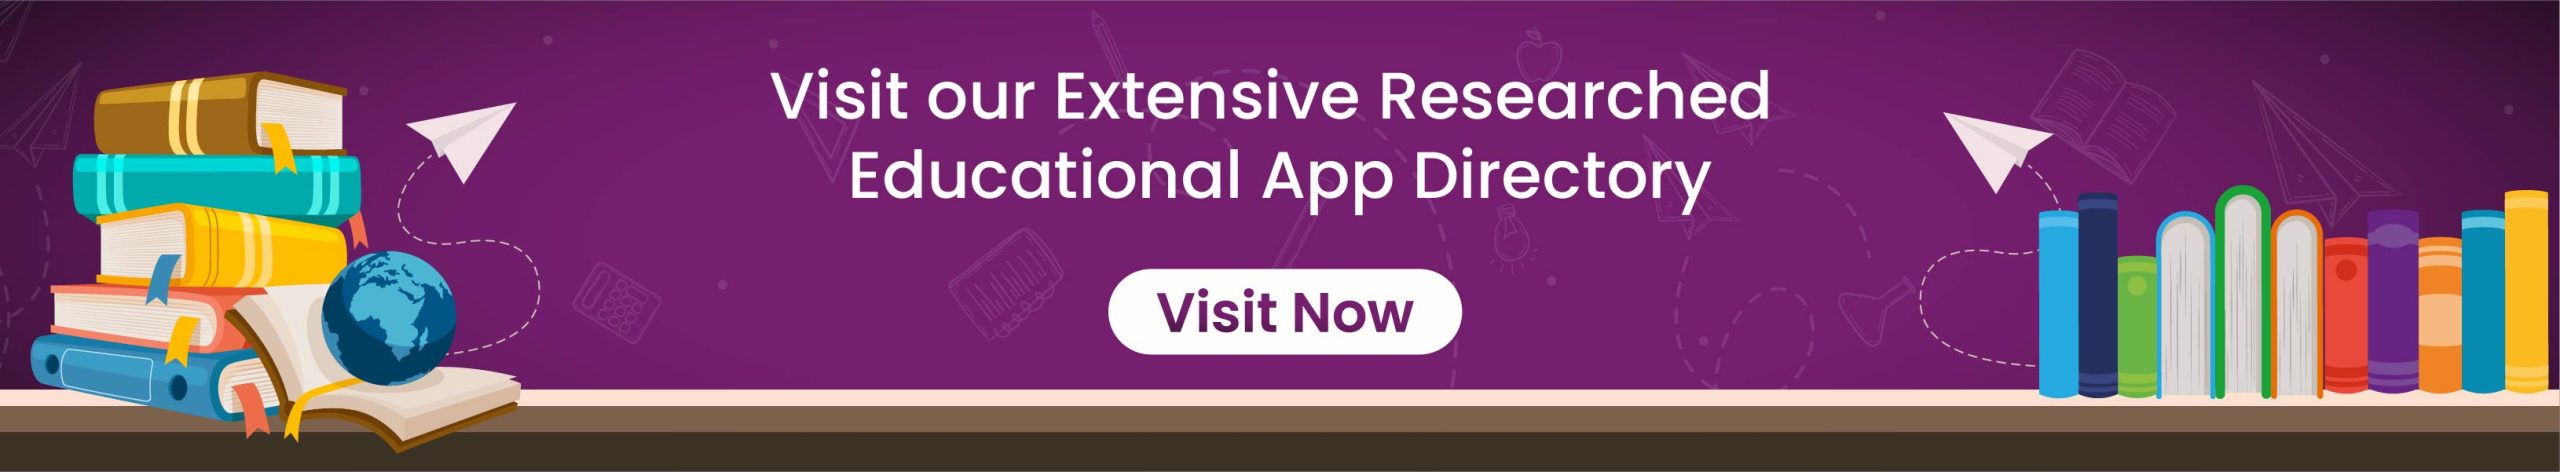 Education App Directory Banner